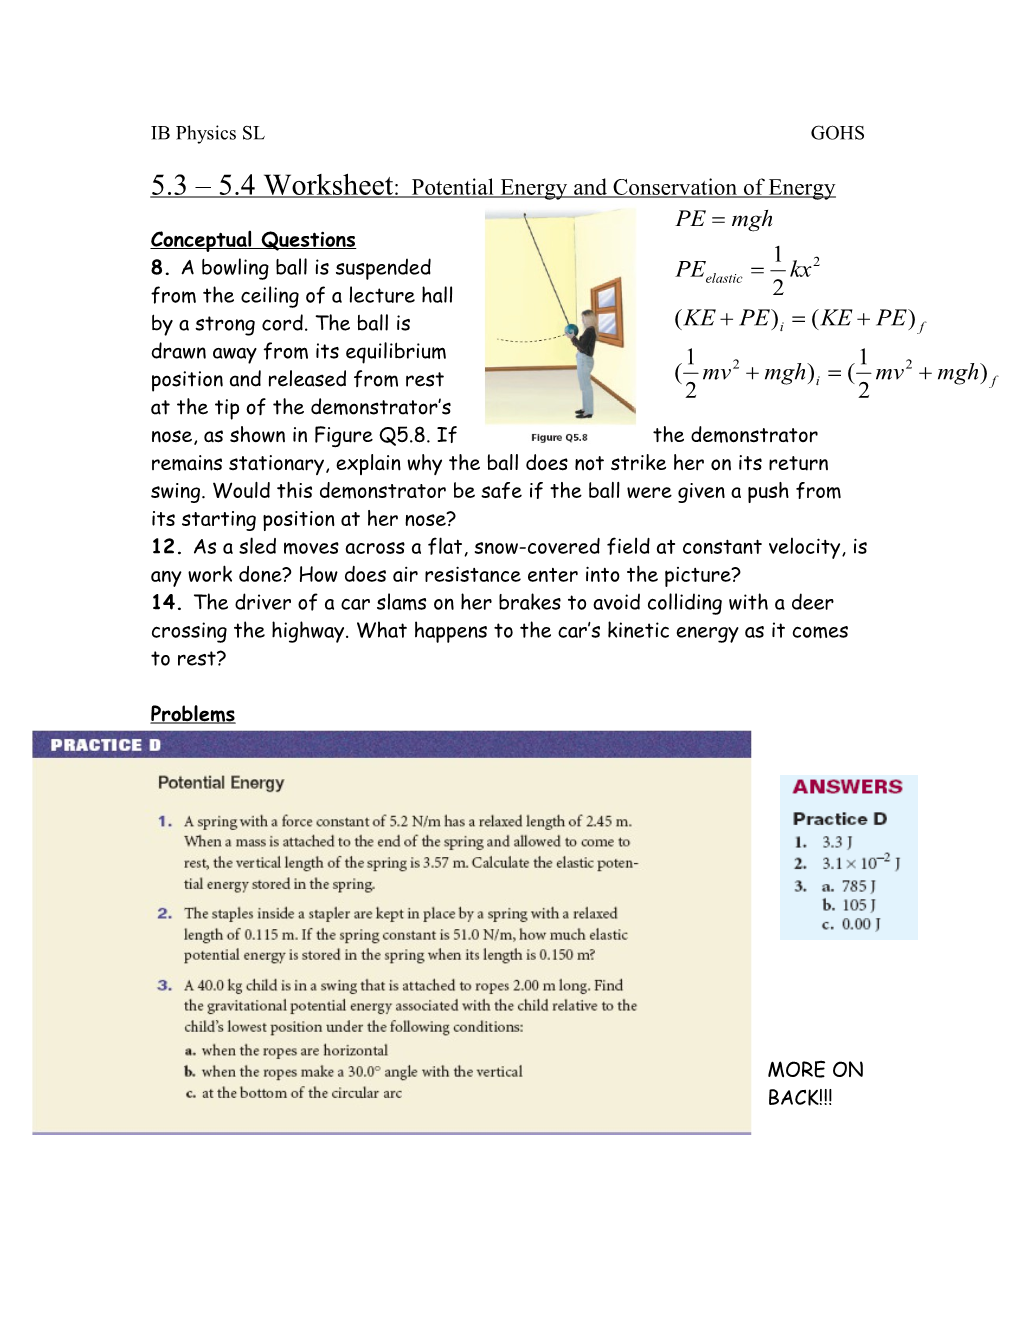 5.3 5.4 Worksheet: Potential Energy and Conservation of Energy